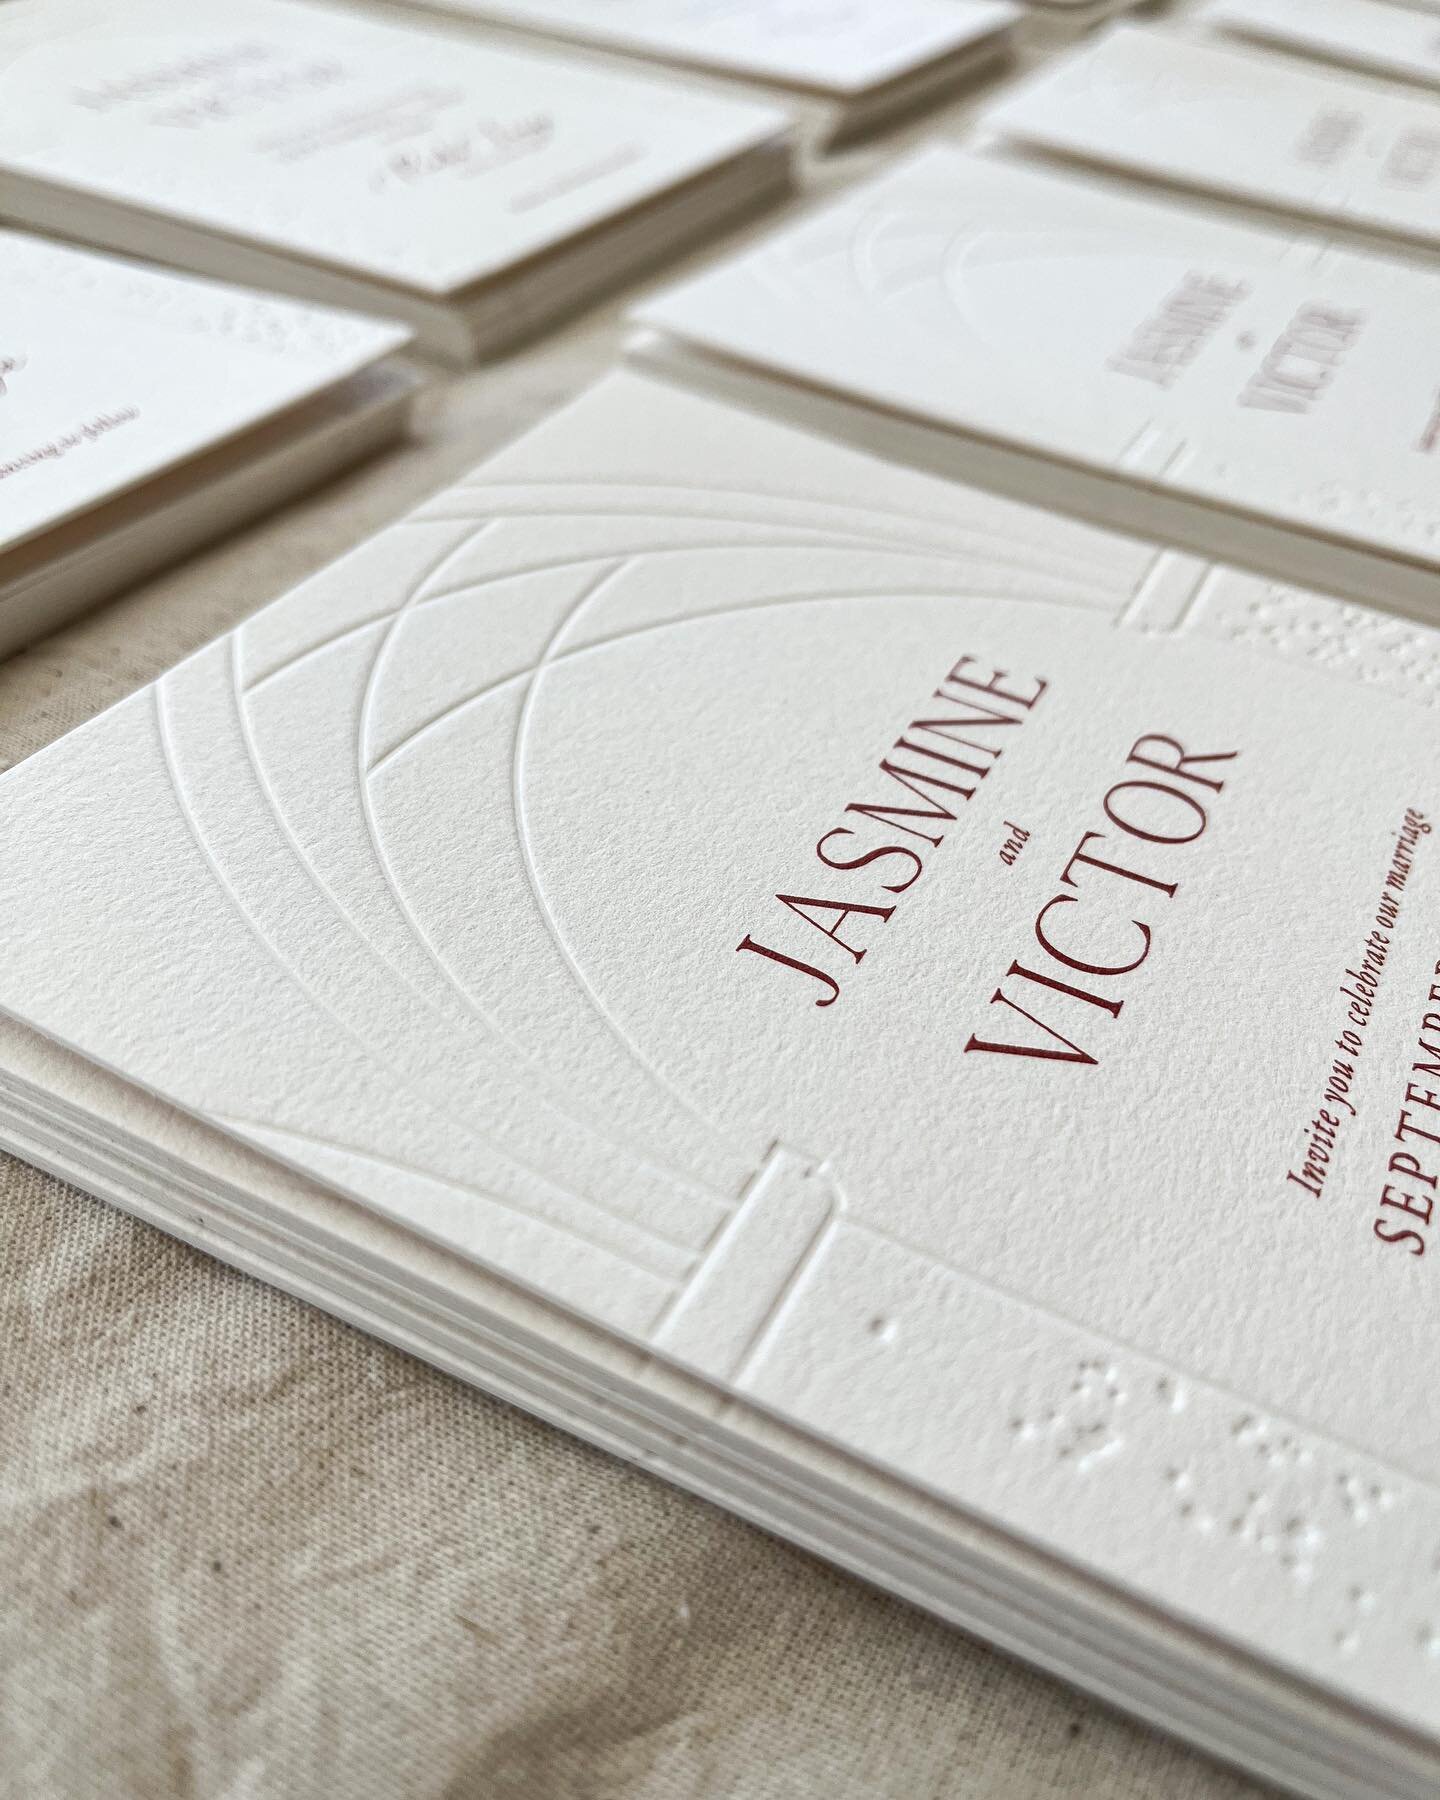 Arches and stone.
Modern design approach to a classic and elegant venue.
Letterpress is always one of the best choices 🤍